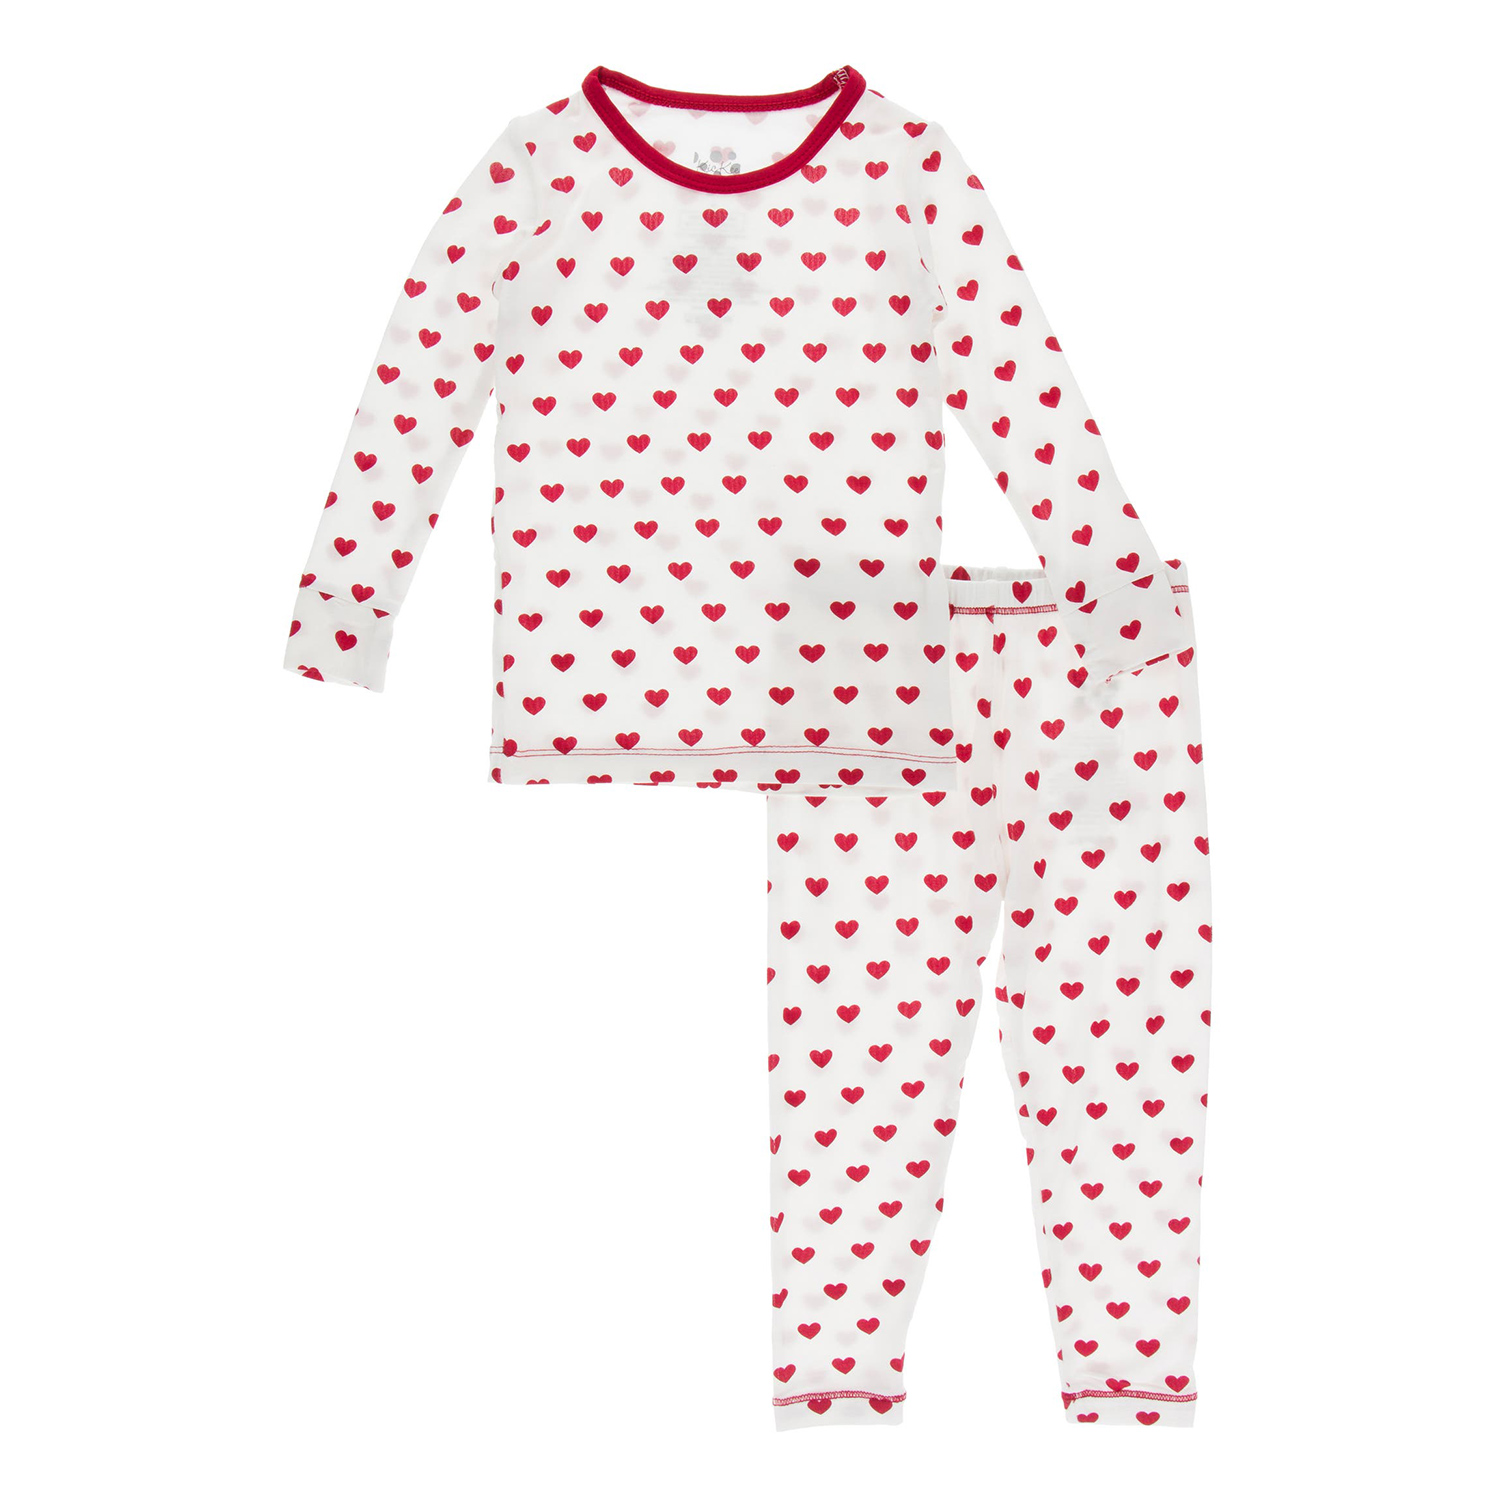 Kickee Pants Heart Print Fitted Two-Piece Pajamas